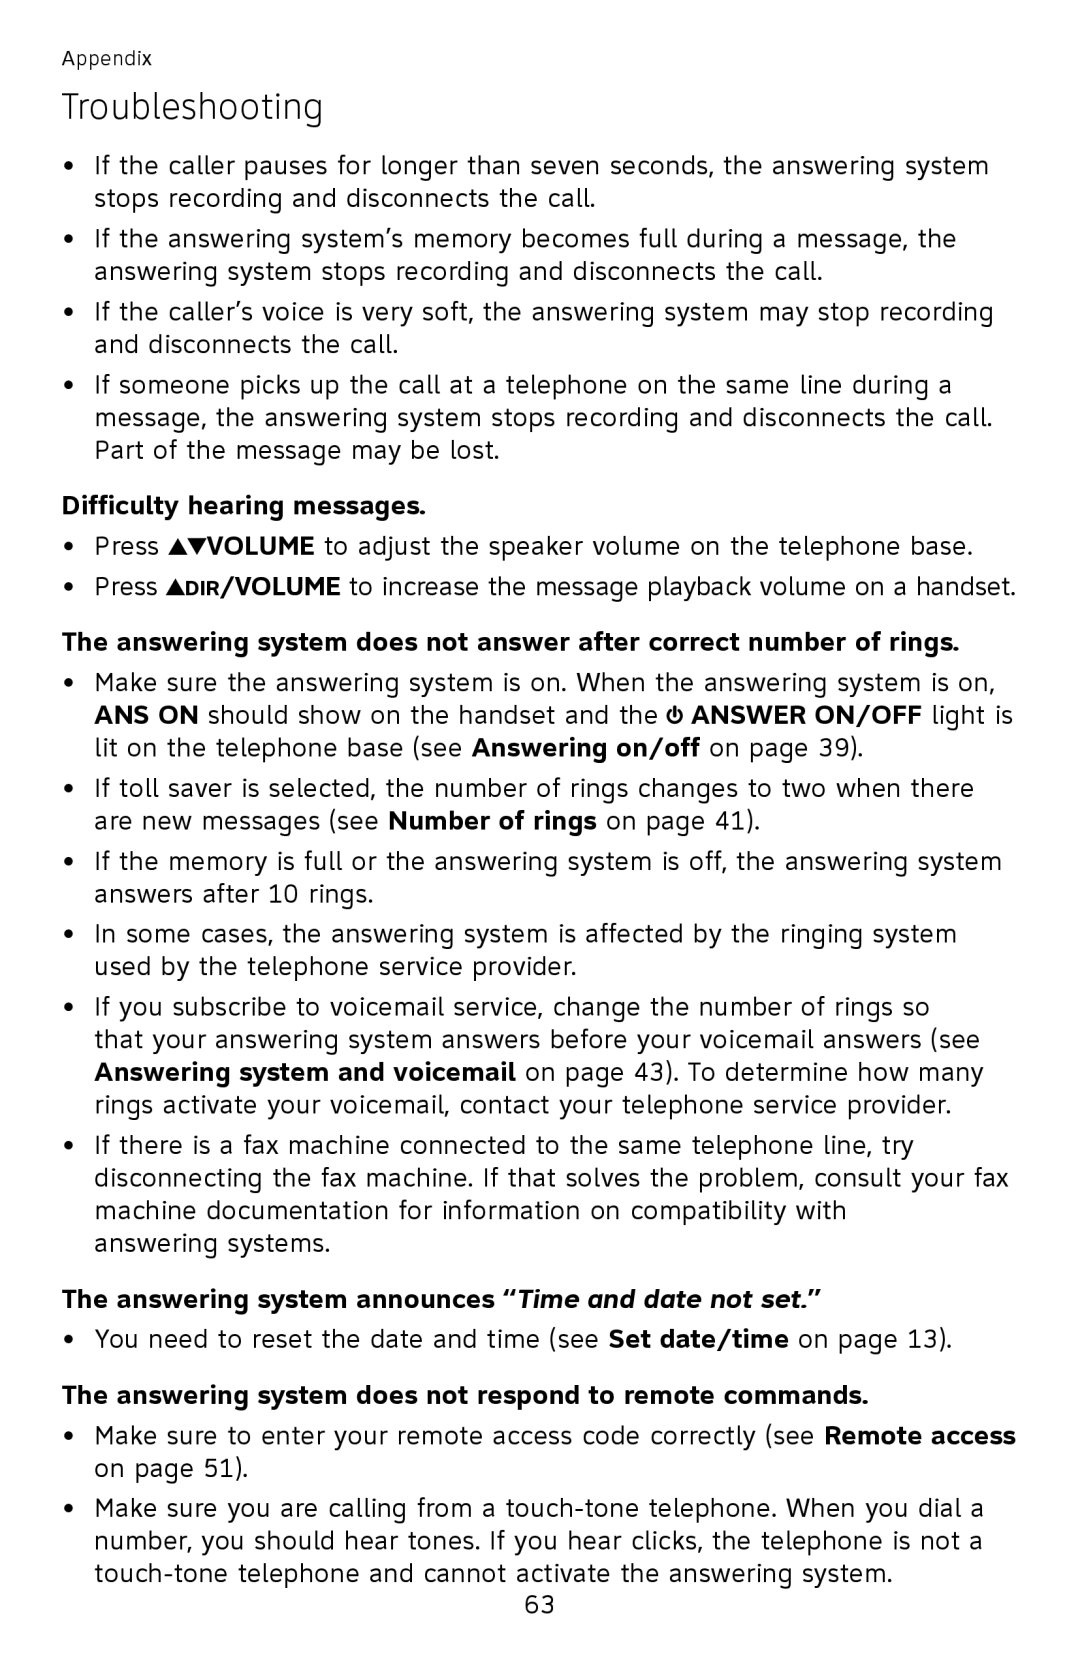 AT&T EL52400, EL52510 Difficulty hearing messages, The answering system does not answer after correct number of rings 